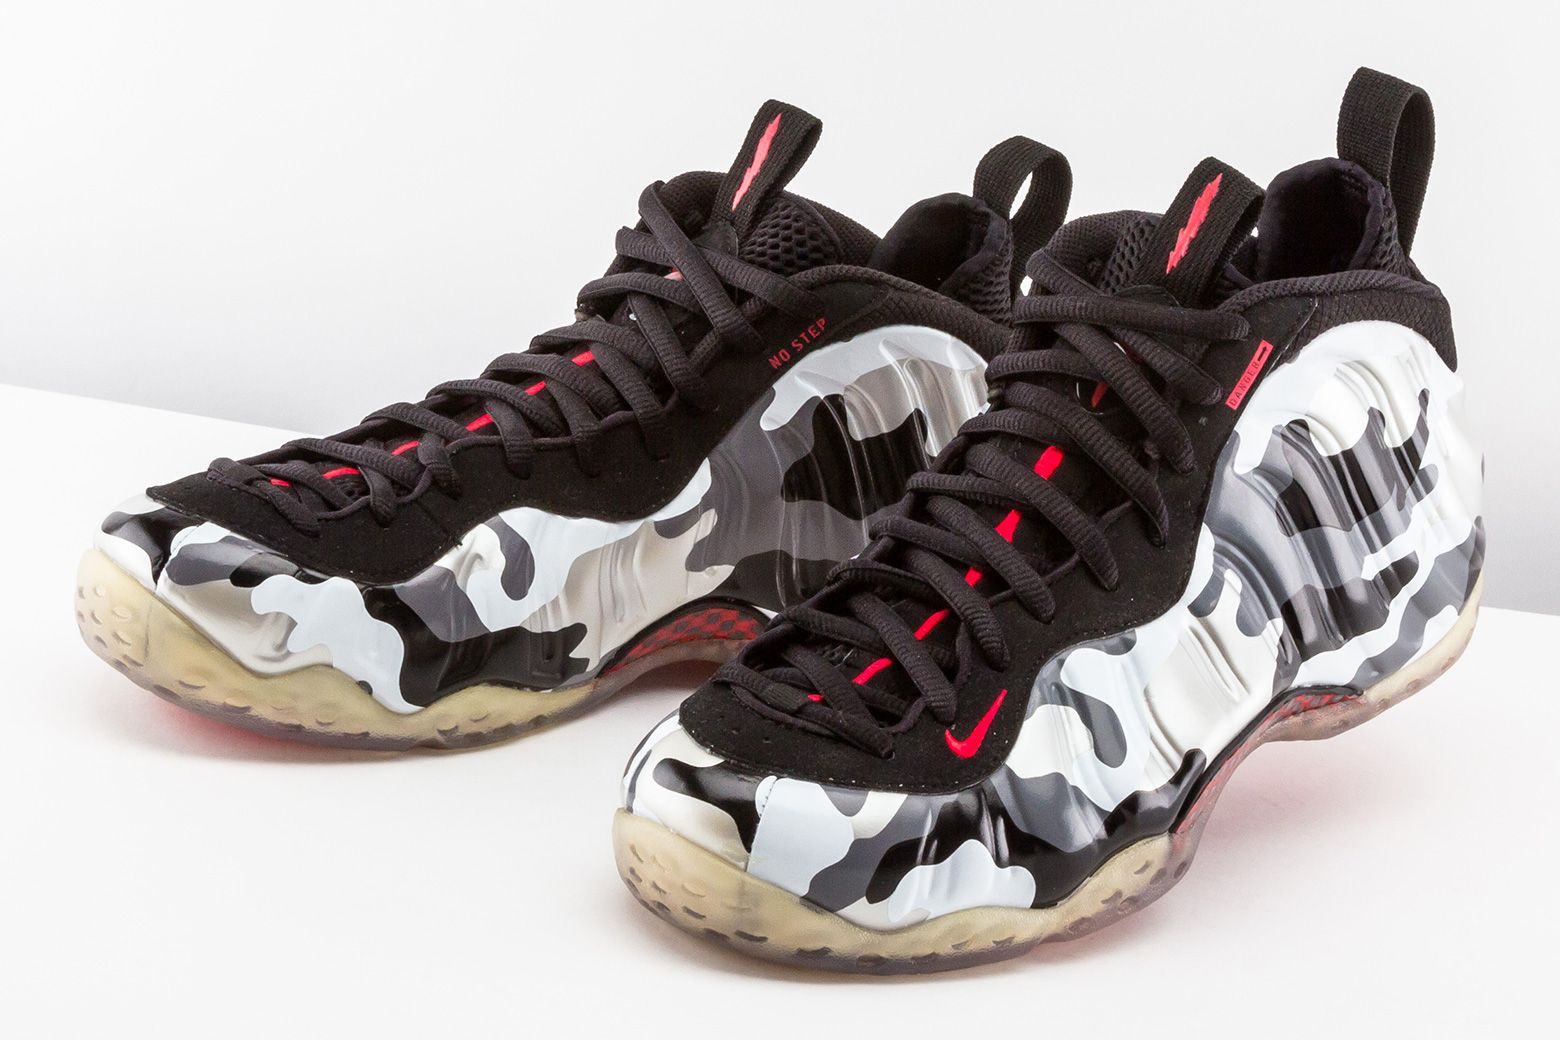 Nike Air Foamposite One Fighter Jet